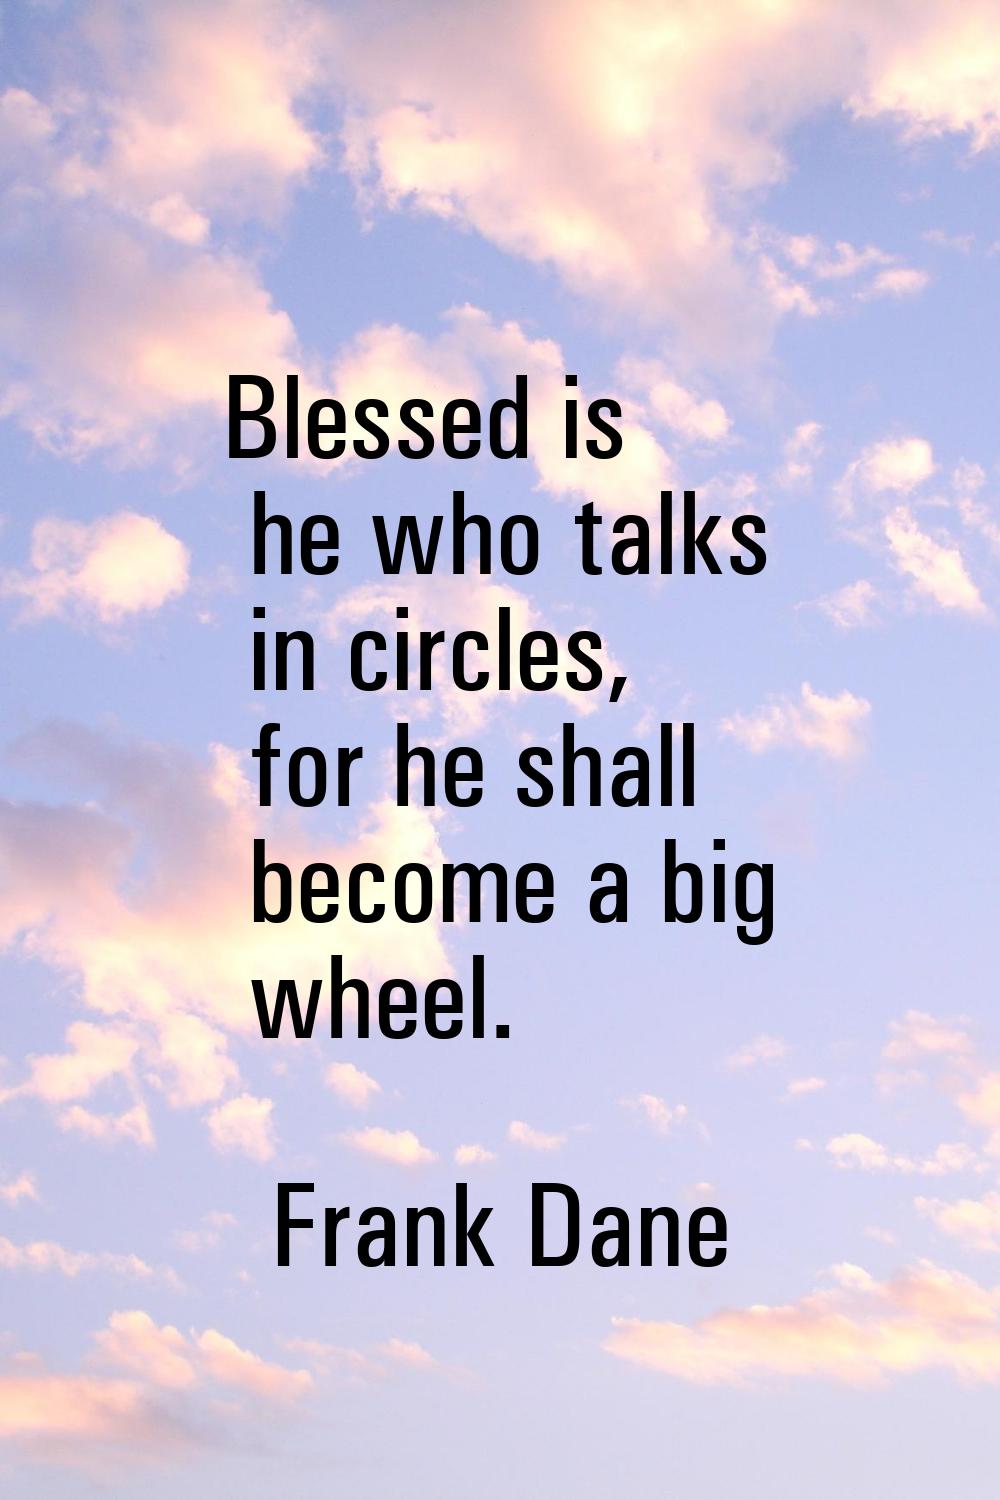 Blessed is he who talks in circles, for he shall become a big wheel.